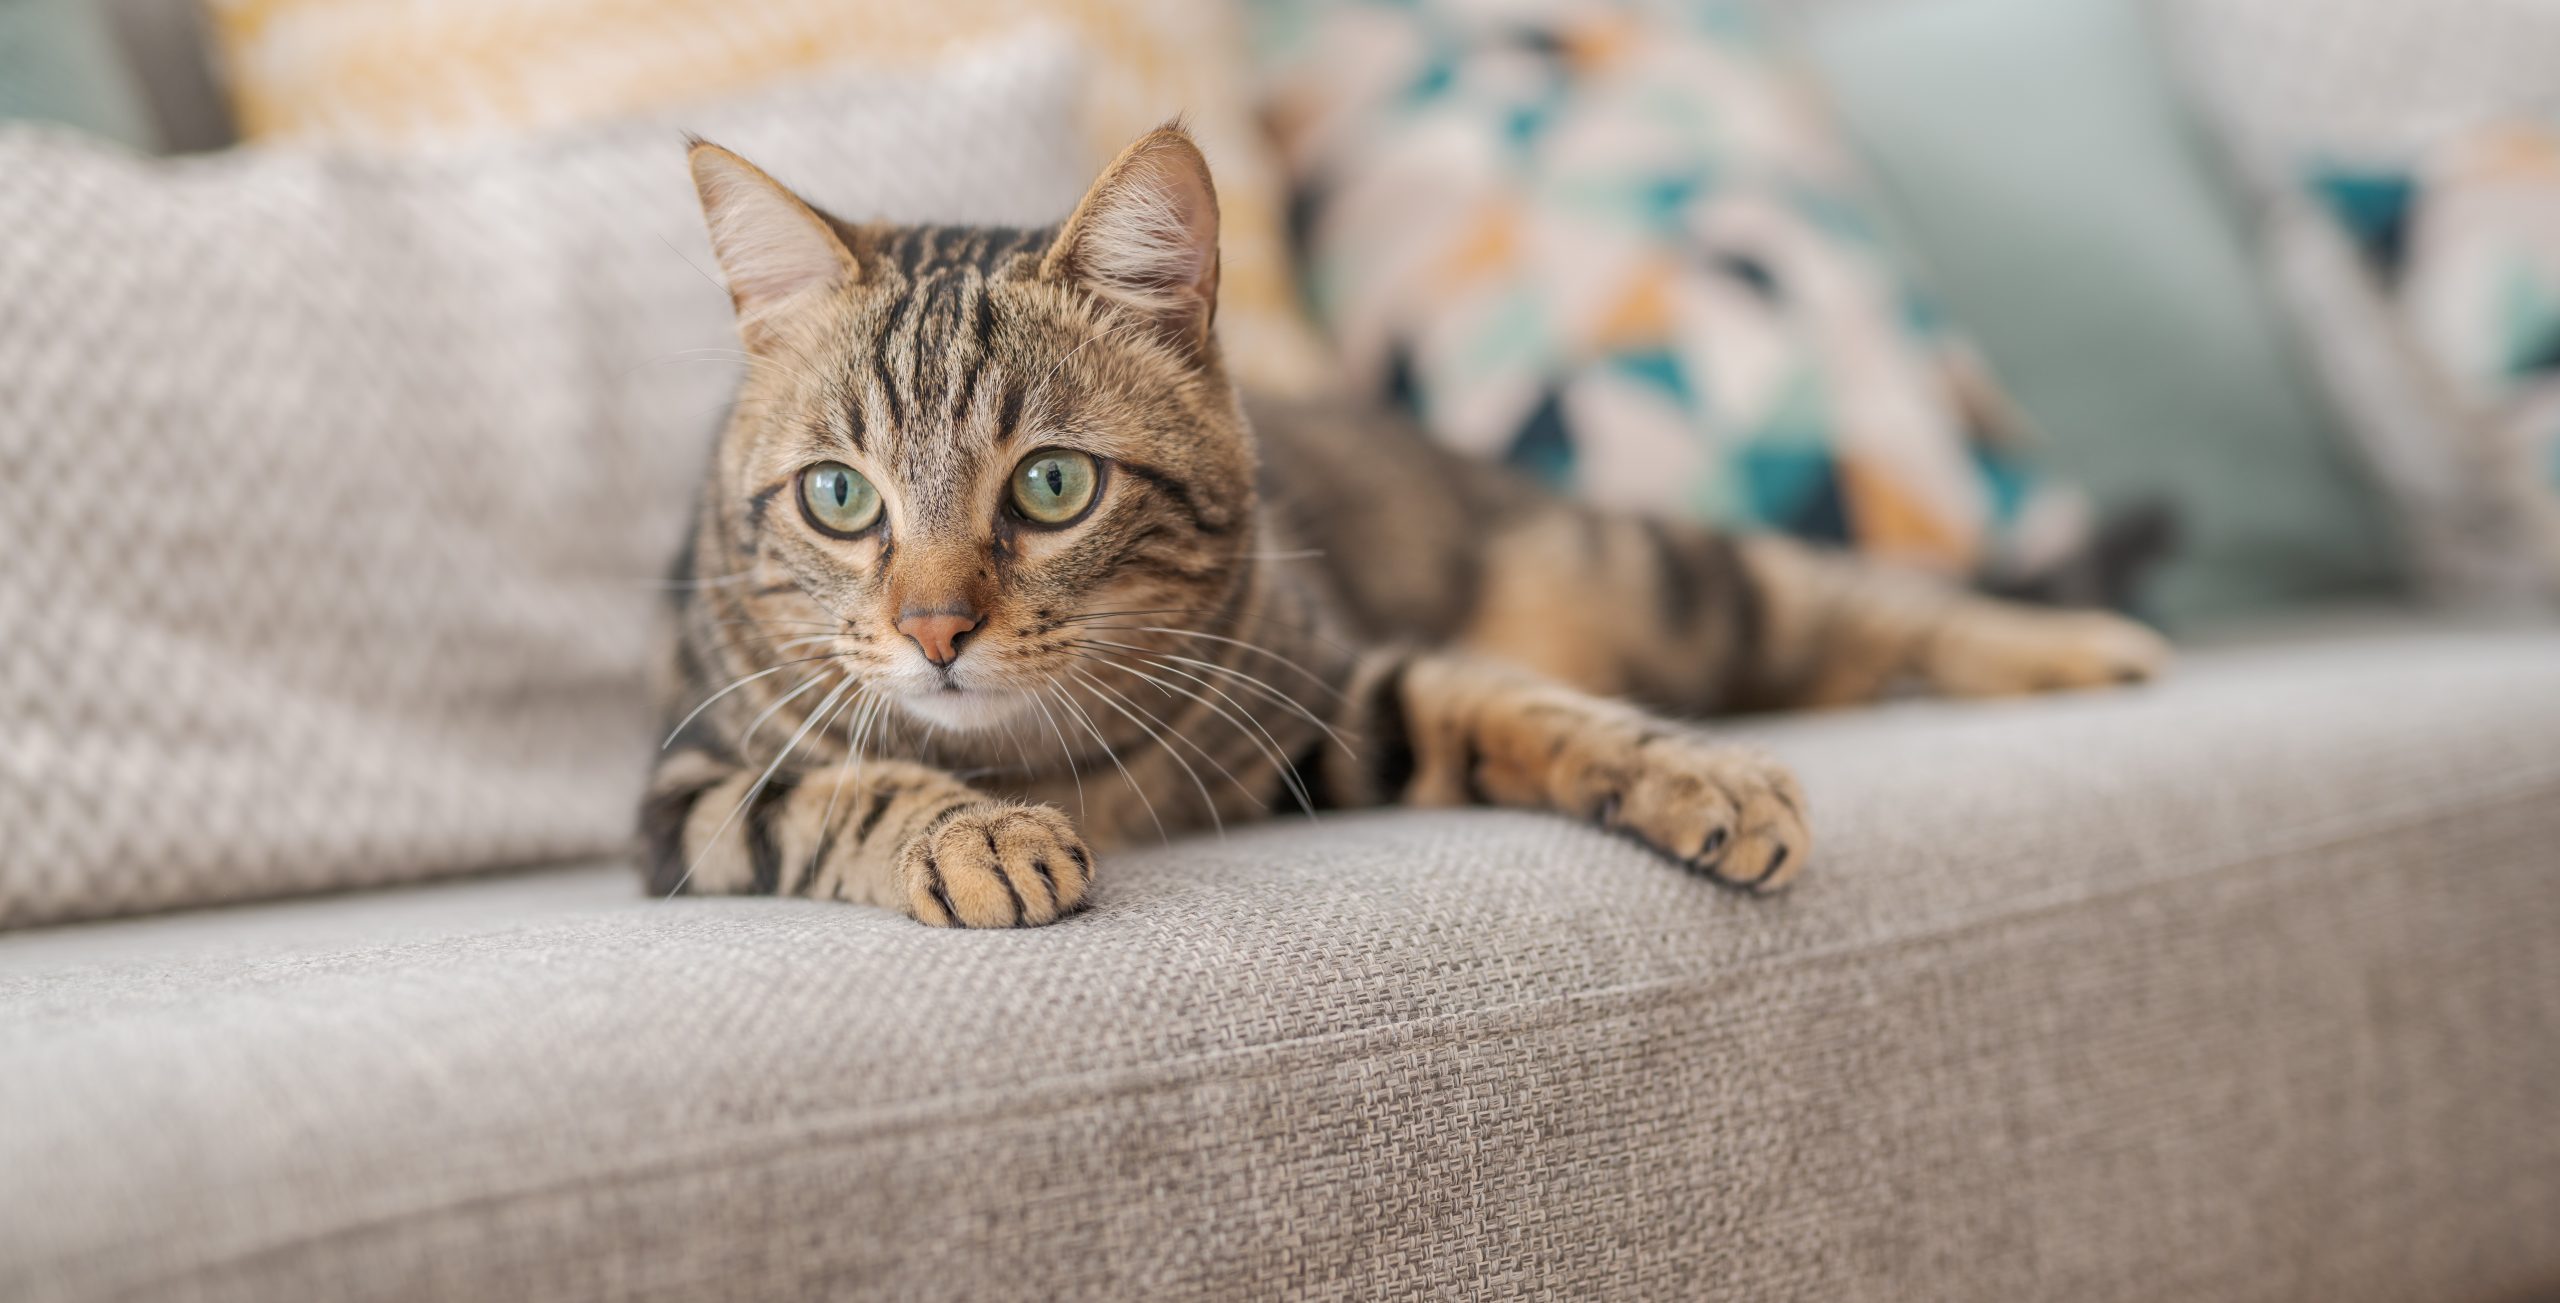 Purr-fectly Amazing: Top Facts About Cats